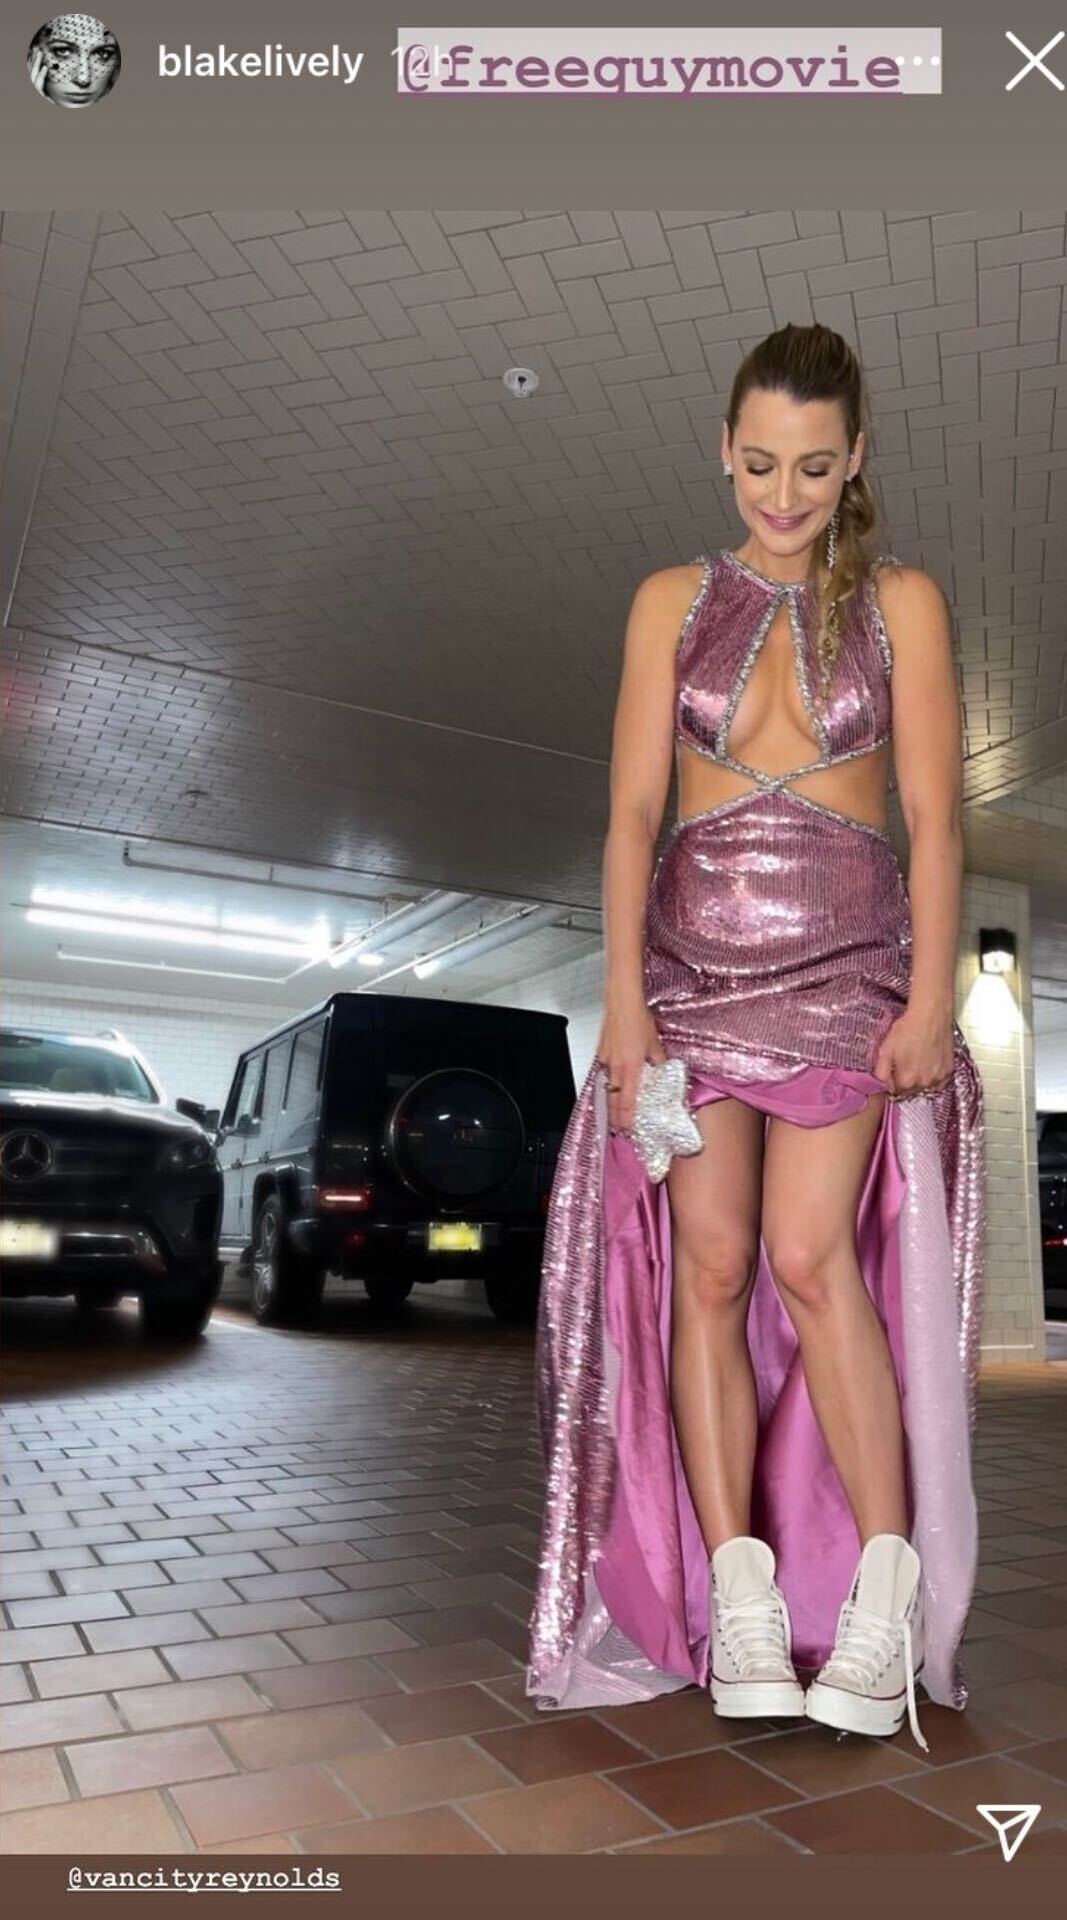 Blake Lively wears converse sneakers under her gown in this screenshot from her Instagram Story